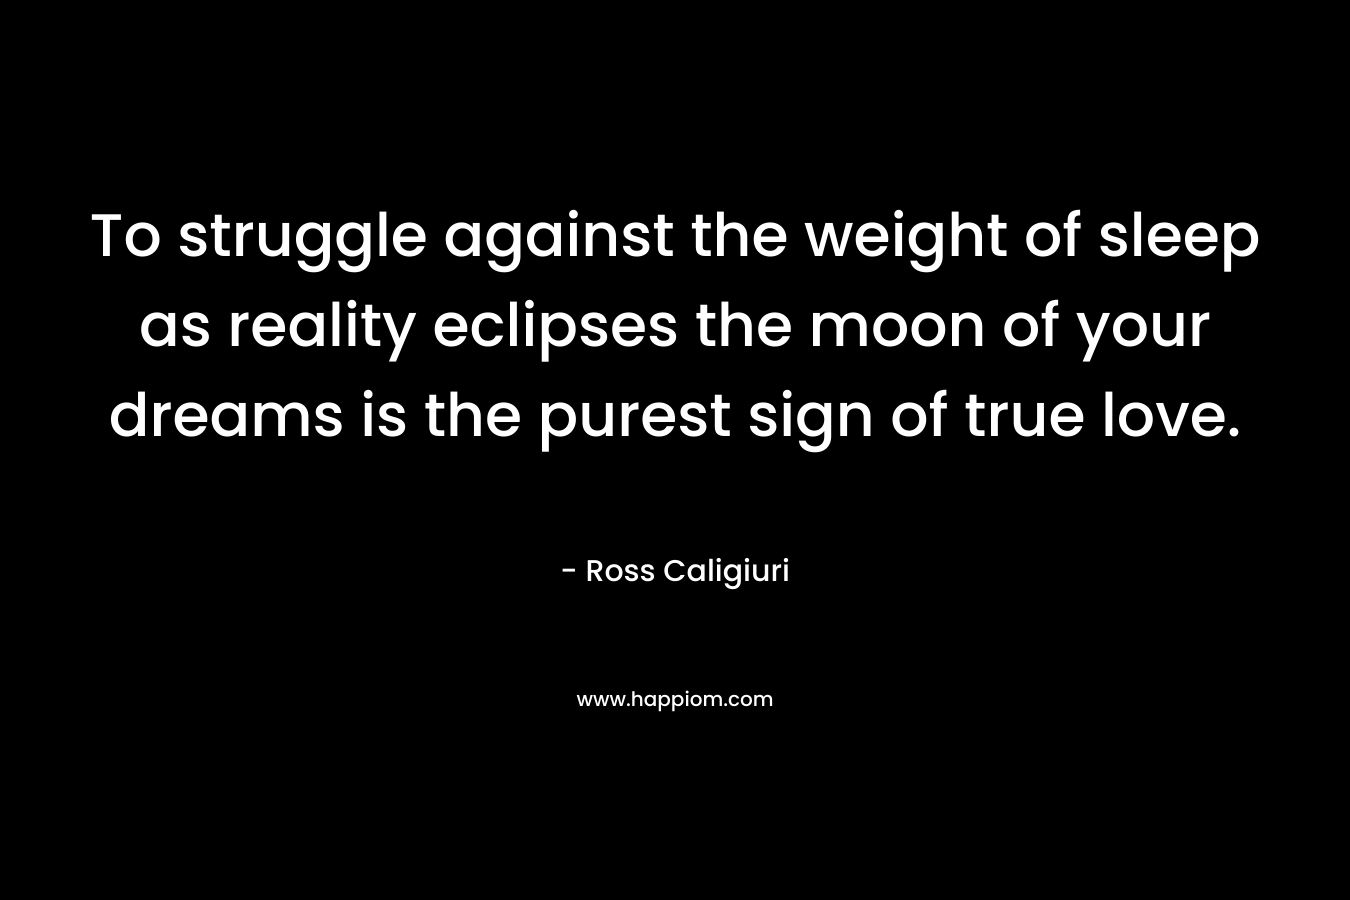 To struggle against the weight of sleep as reality eclipses the moon of your dreams is the purest sign of true love.